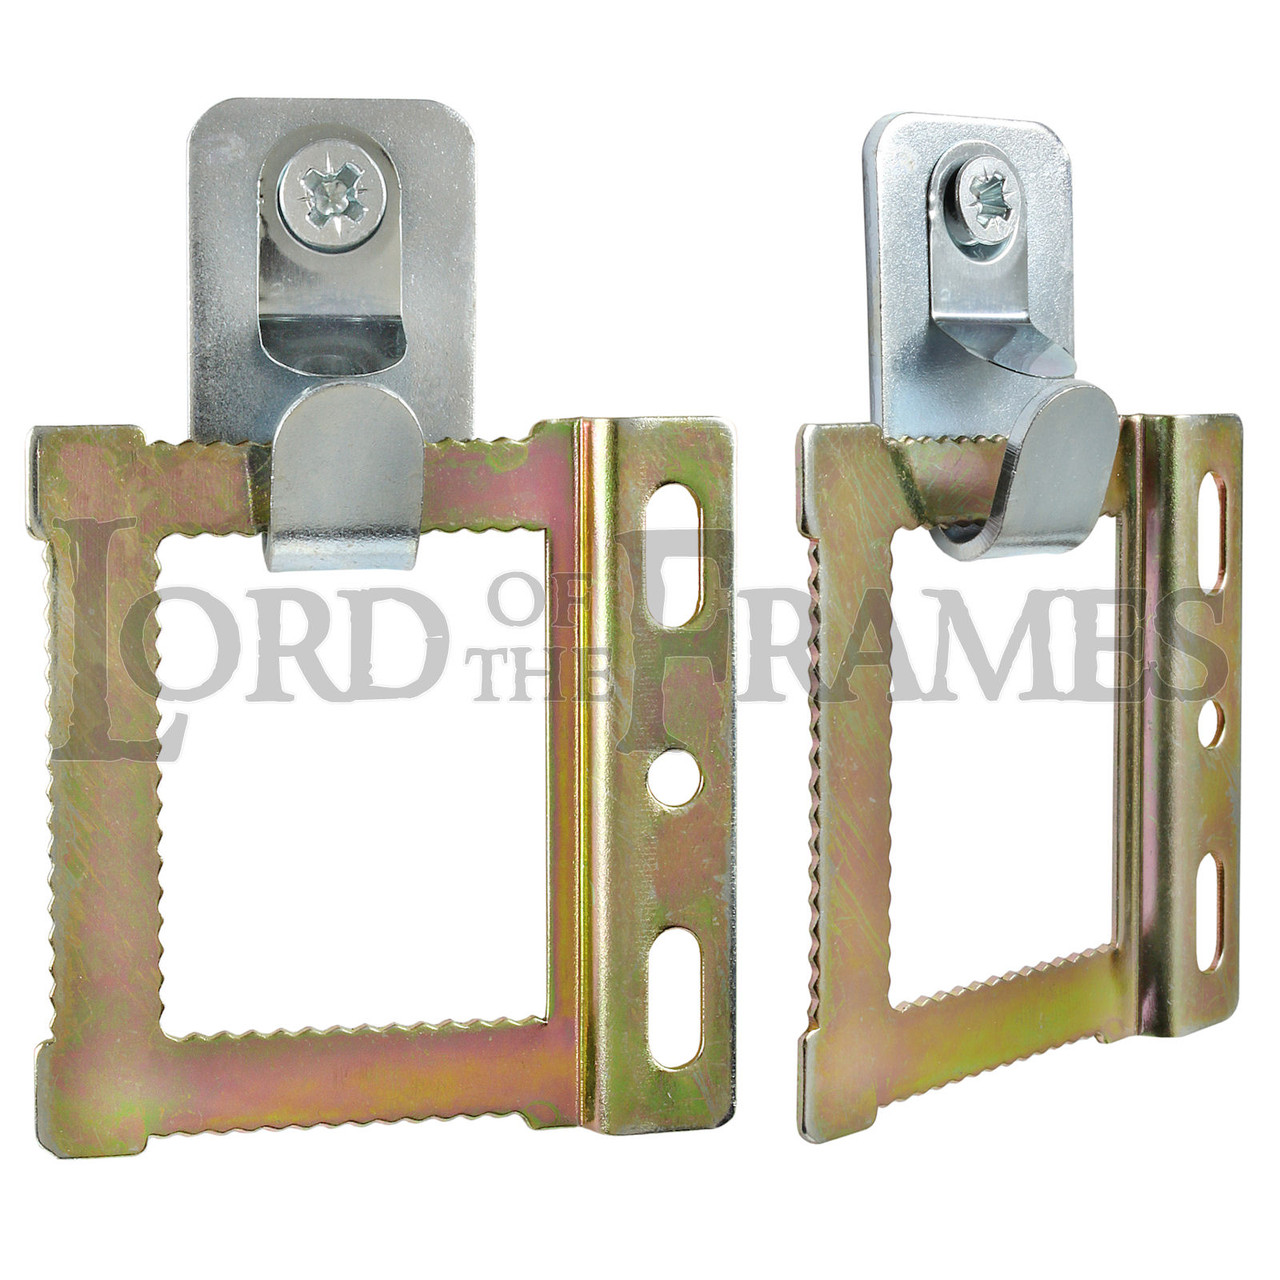 Heavy Duty Safety Hook  Lord of the Frames Ltd